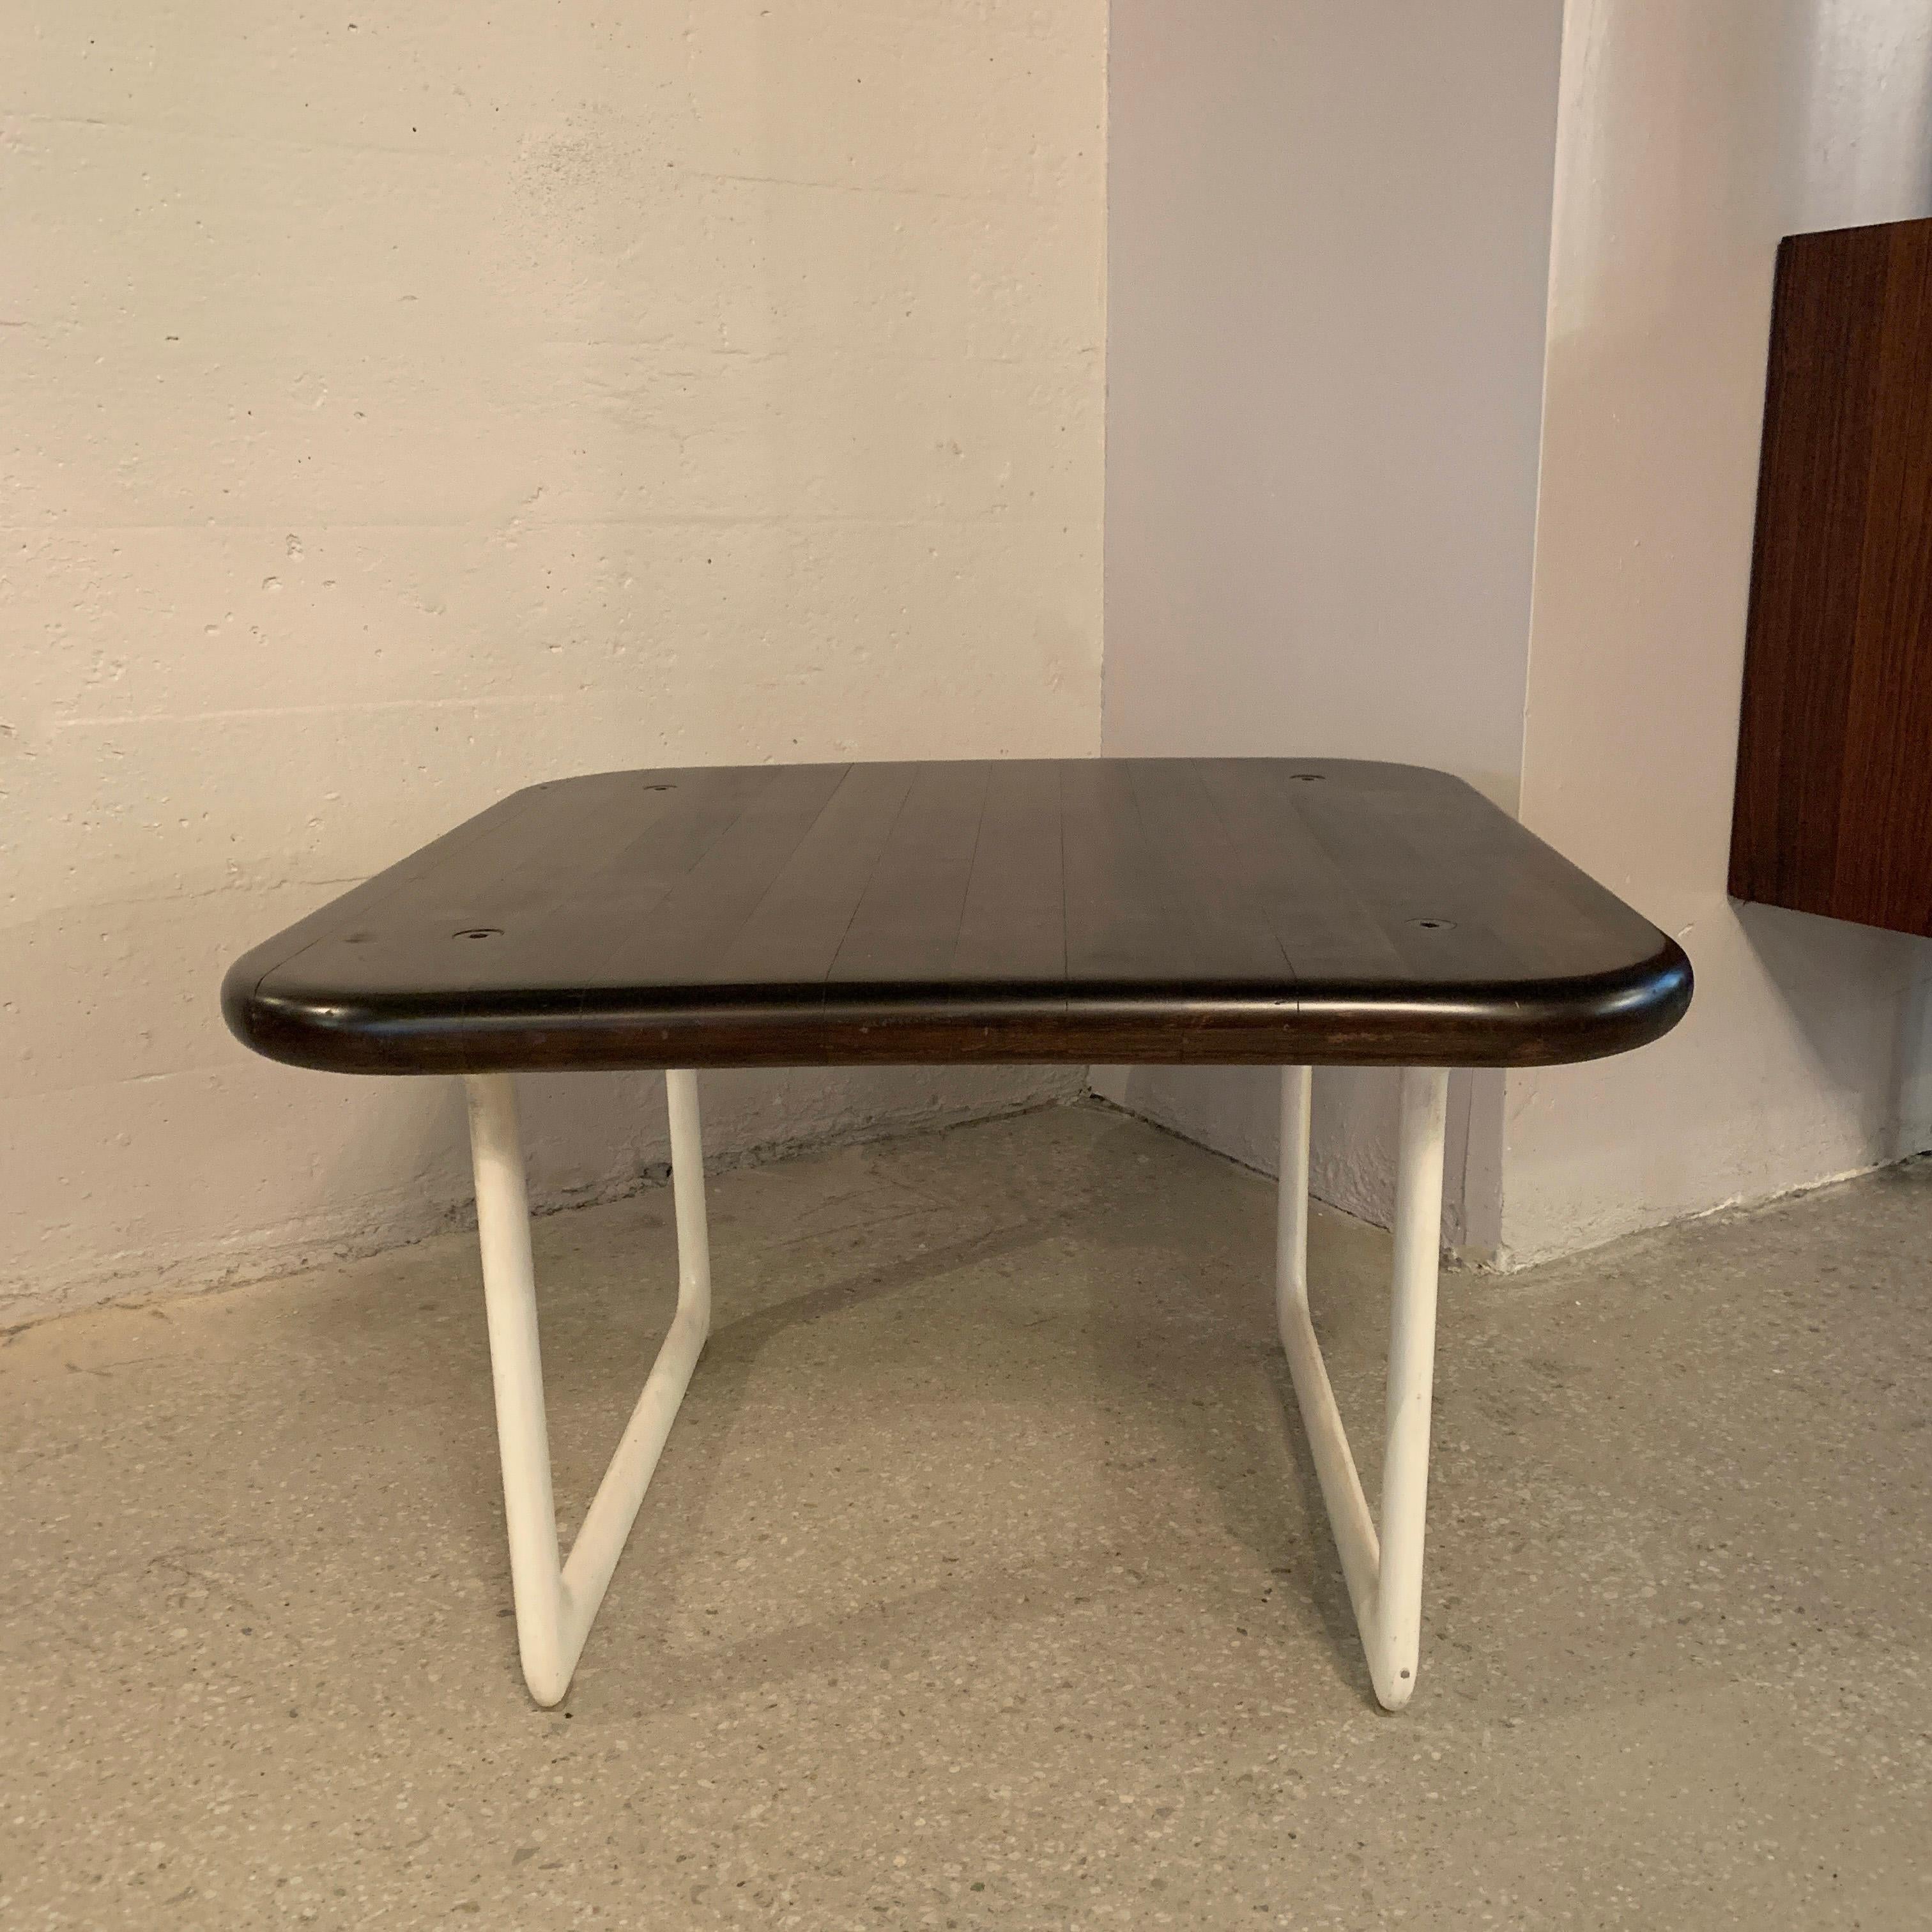 American Mid-Century Modern Coffee Table by Hannah Morrison for Knoll